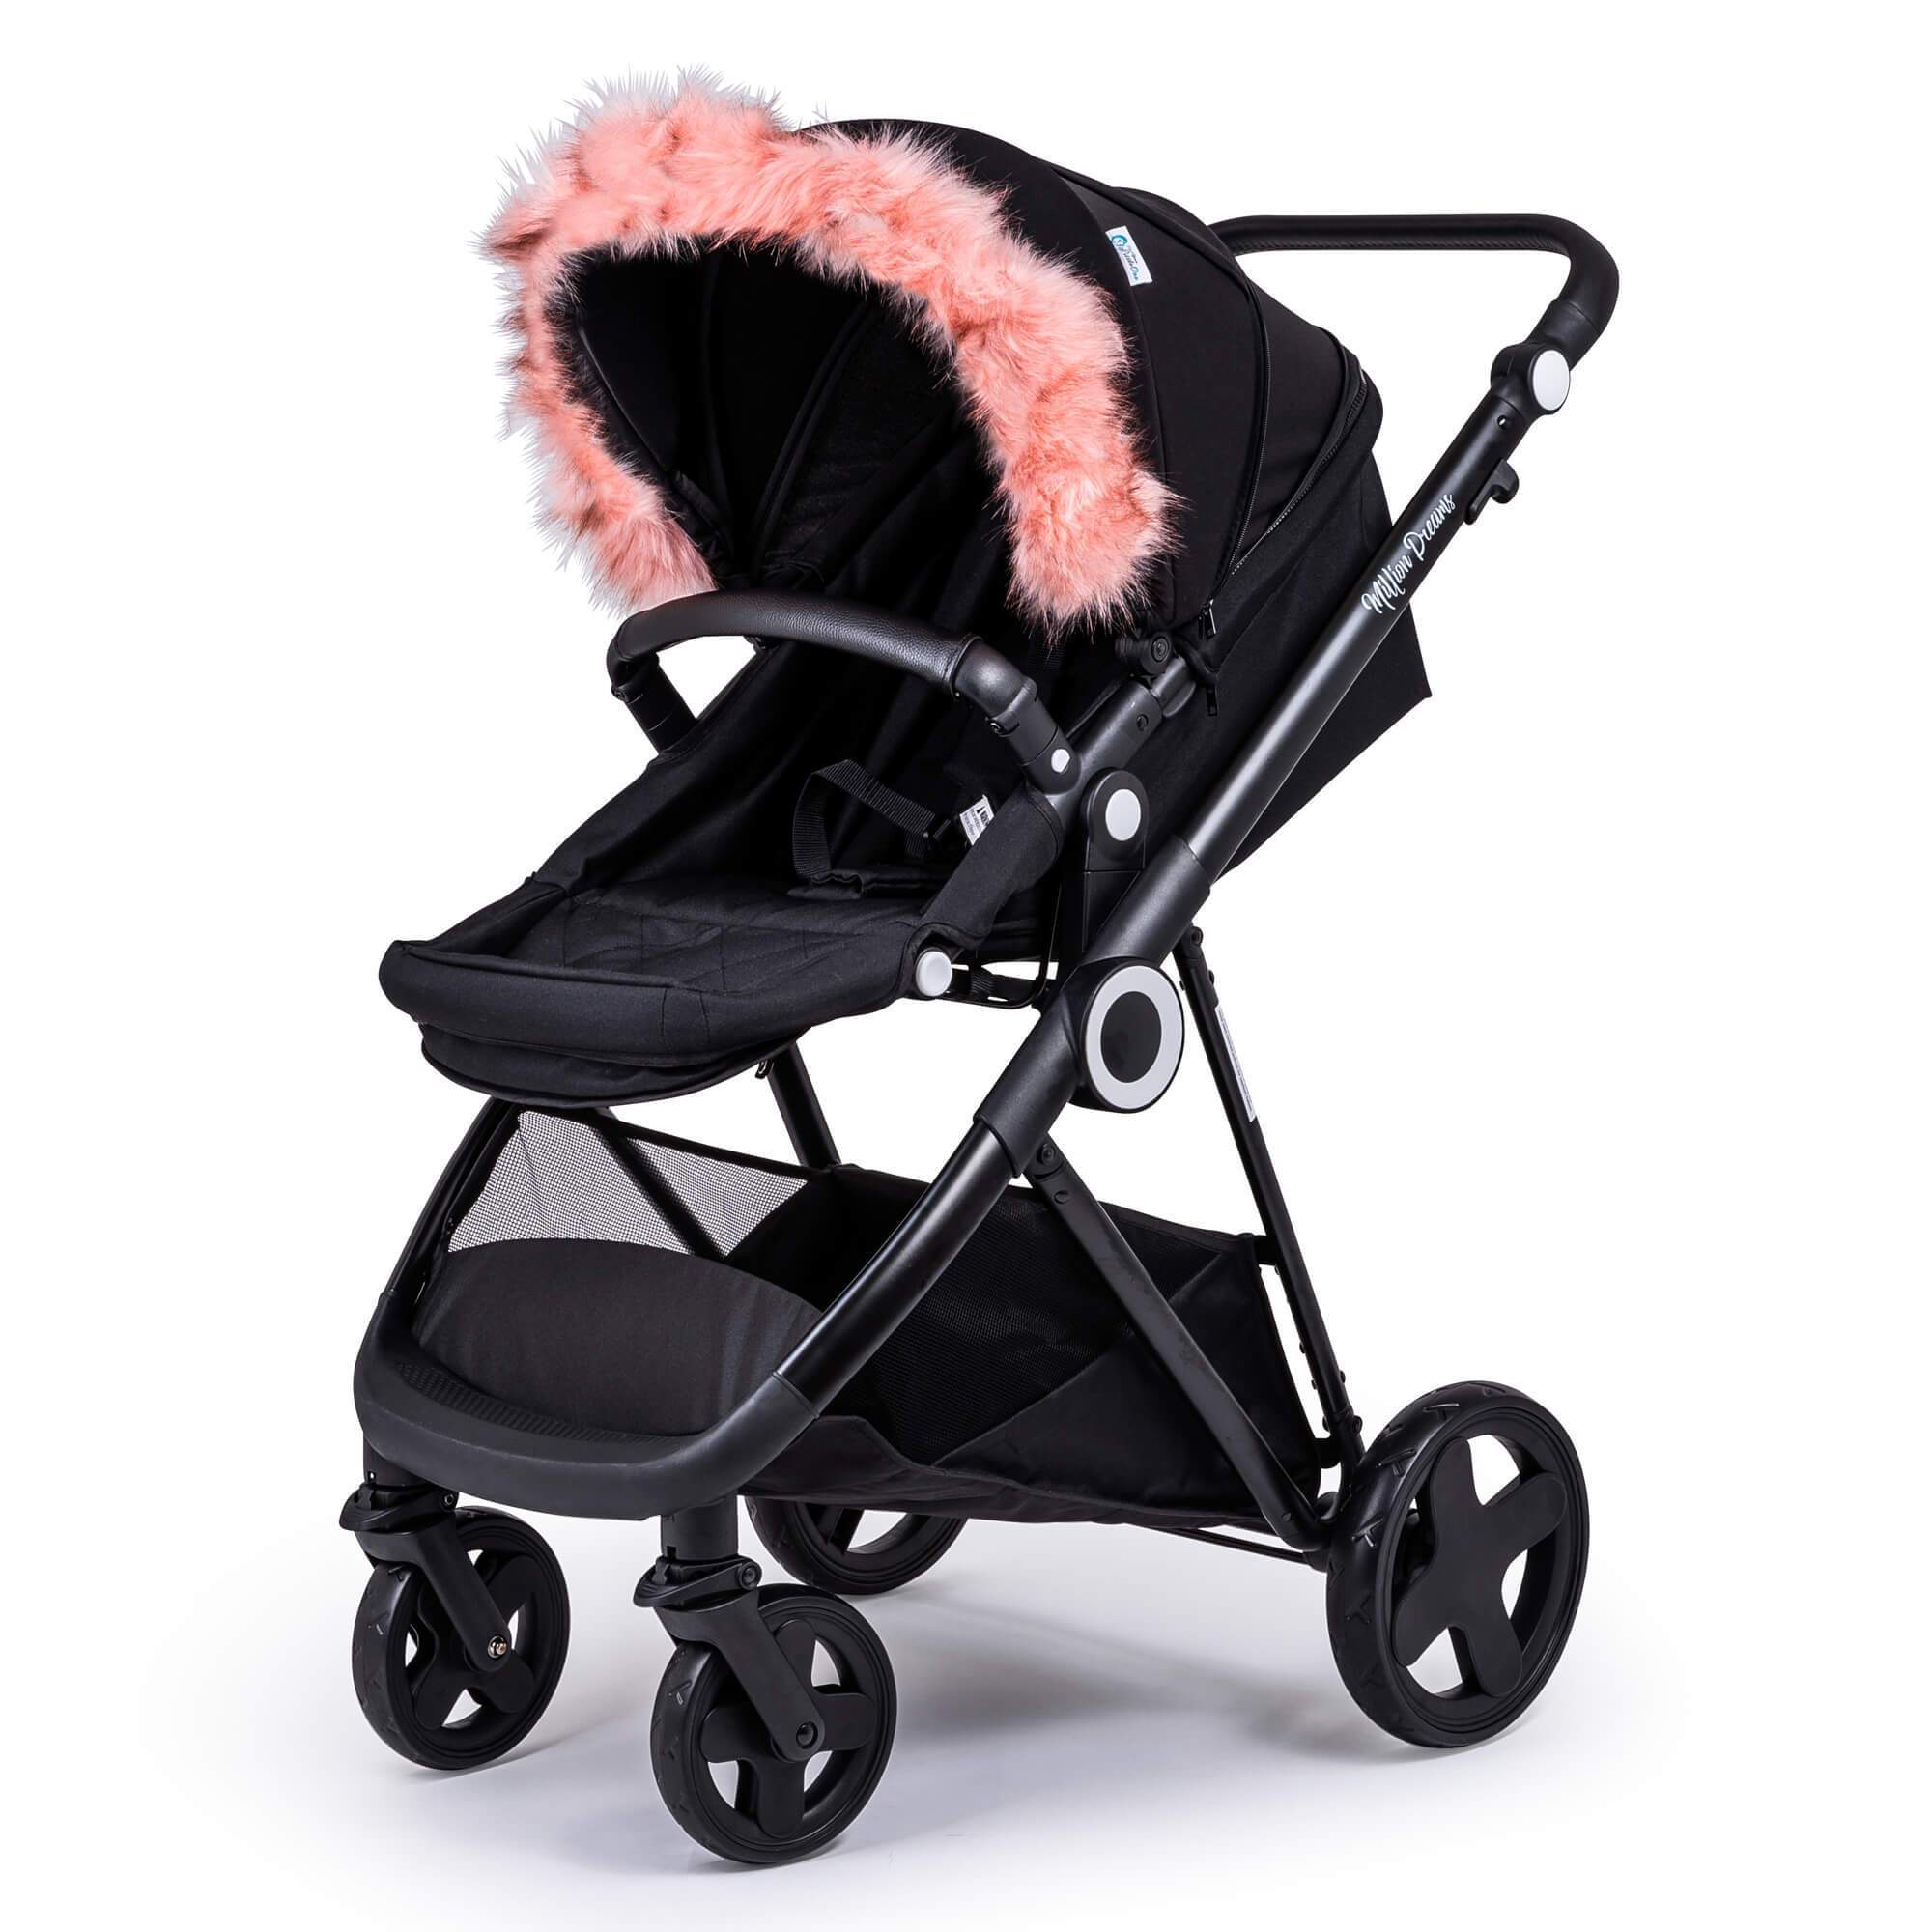 Pram Fur Hood Trim Attachment For Pushchair Compatible with Kids Kargo - Pink / Fits All Models | For Your Little One